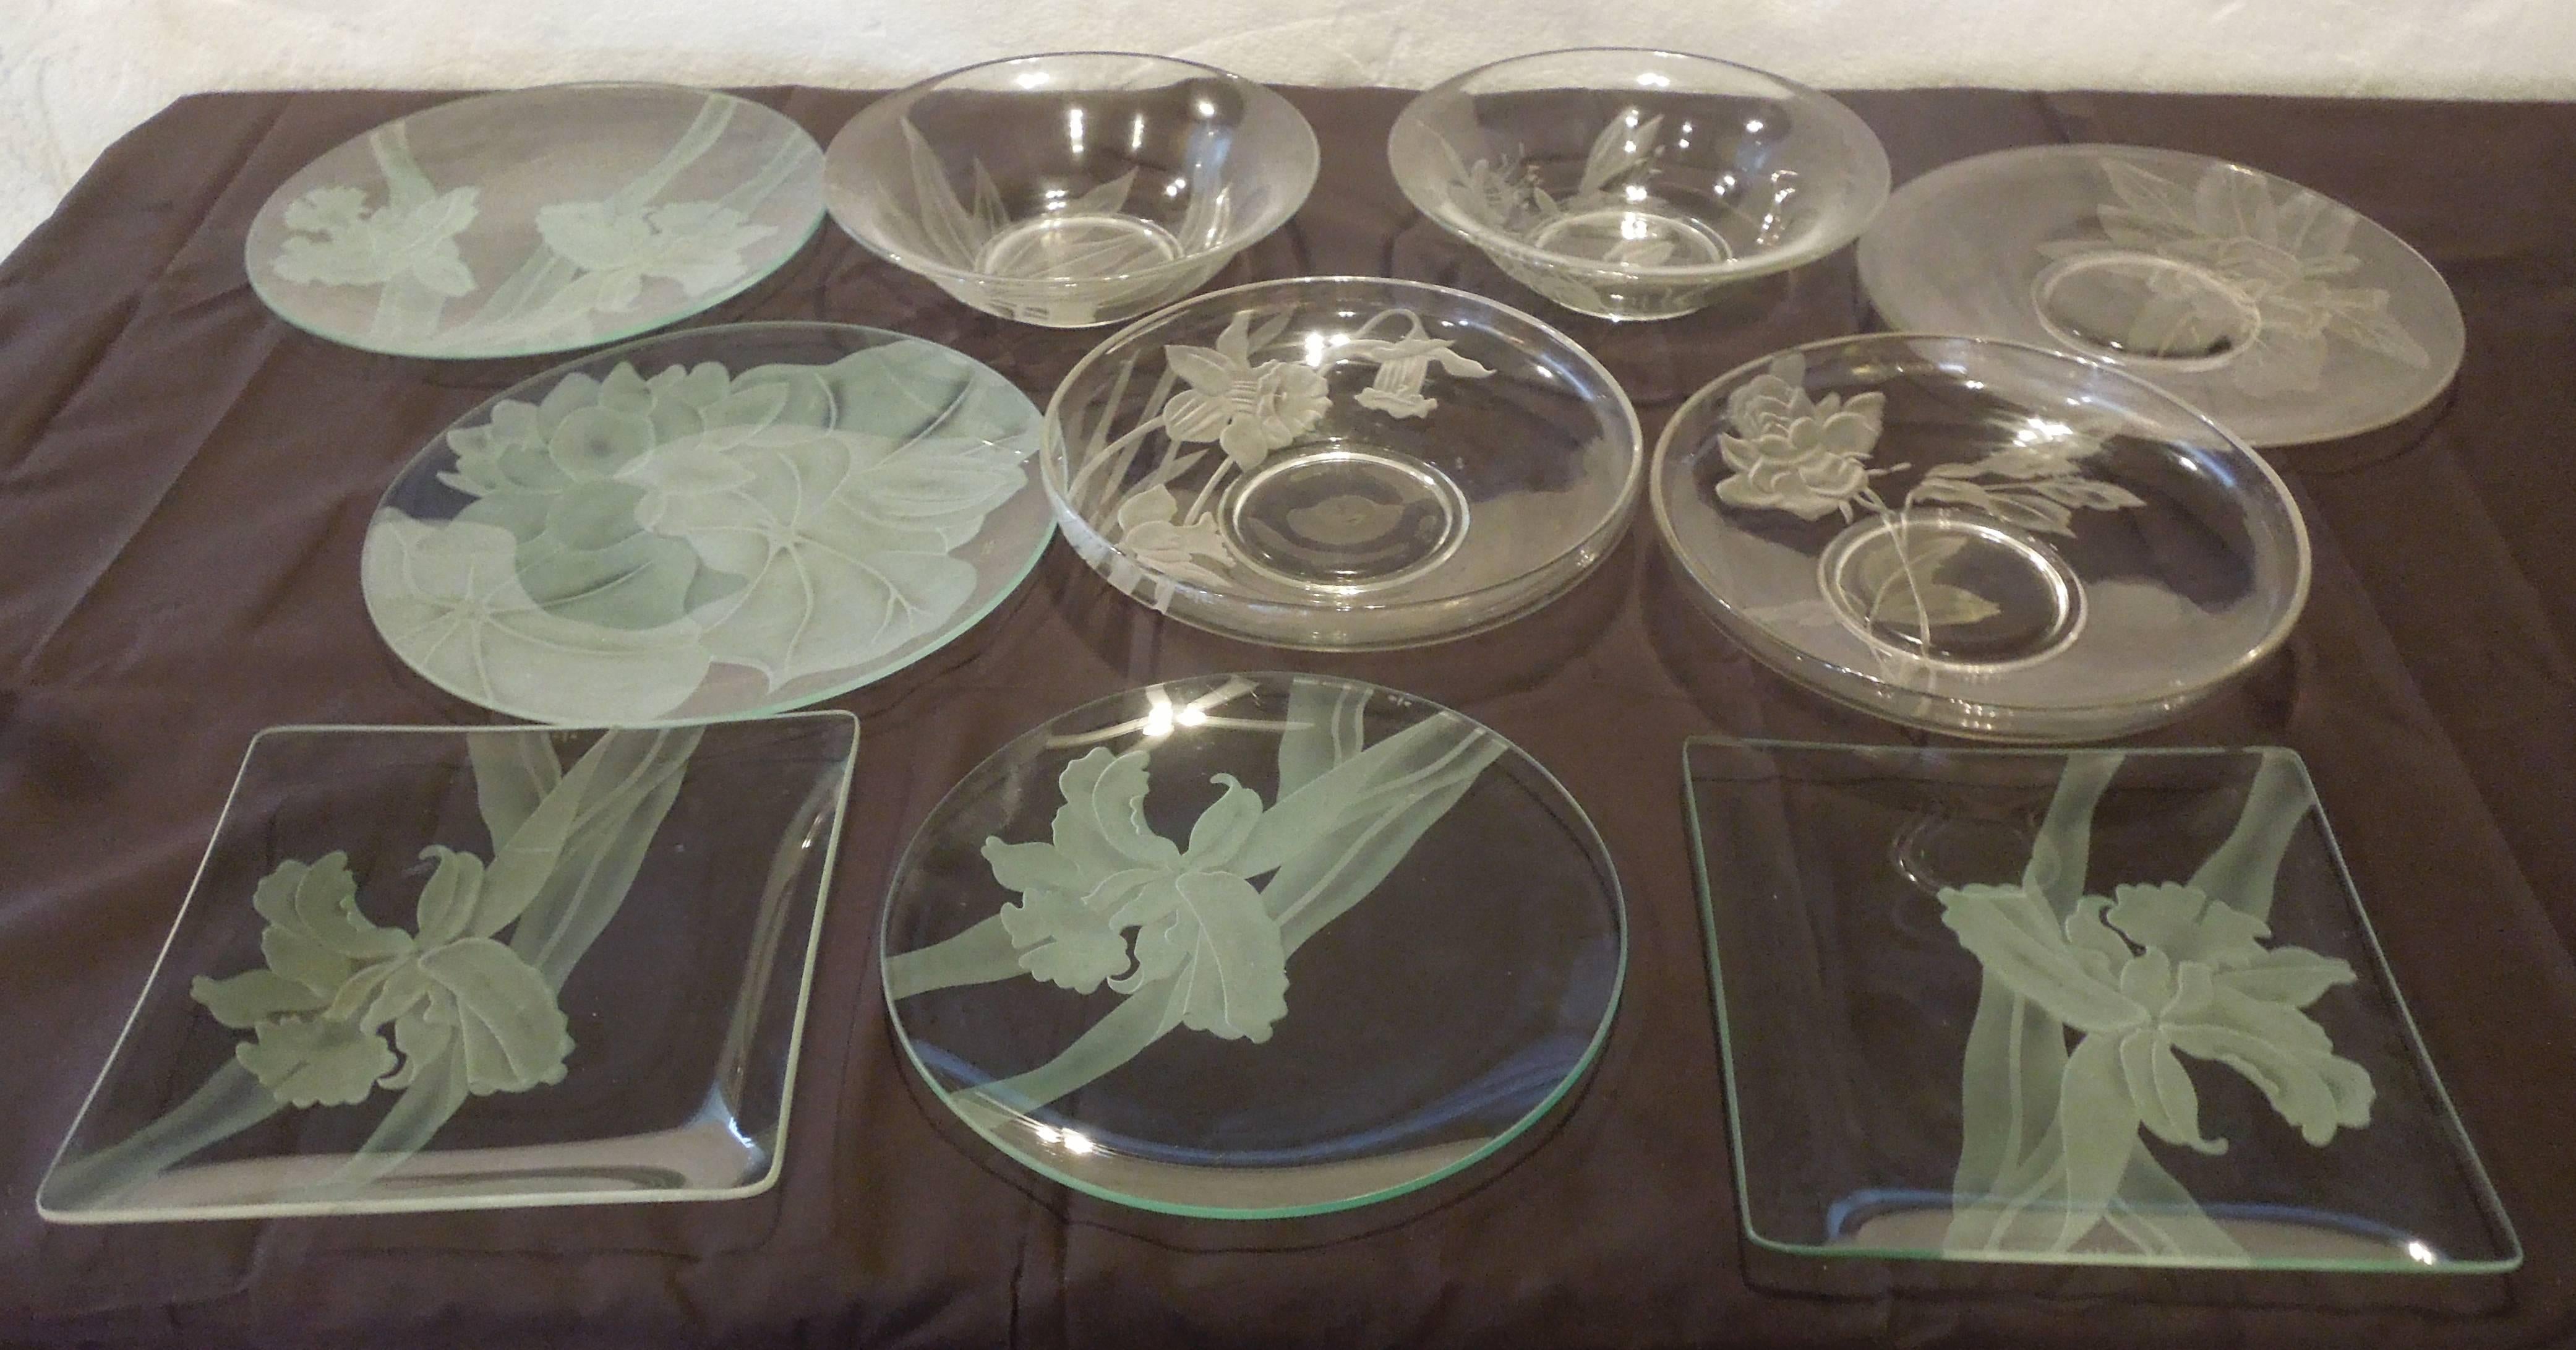 From a collection that took 30 years to collect, a rare set of all signed DTC (Dorothy Thorpe California) serving plates and bowls. All deeply hand etched inspired by Mrs. Thorpe love of flowers in Hawaii. When these were sold in the early 60s, they